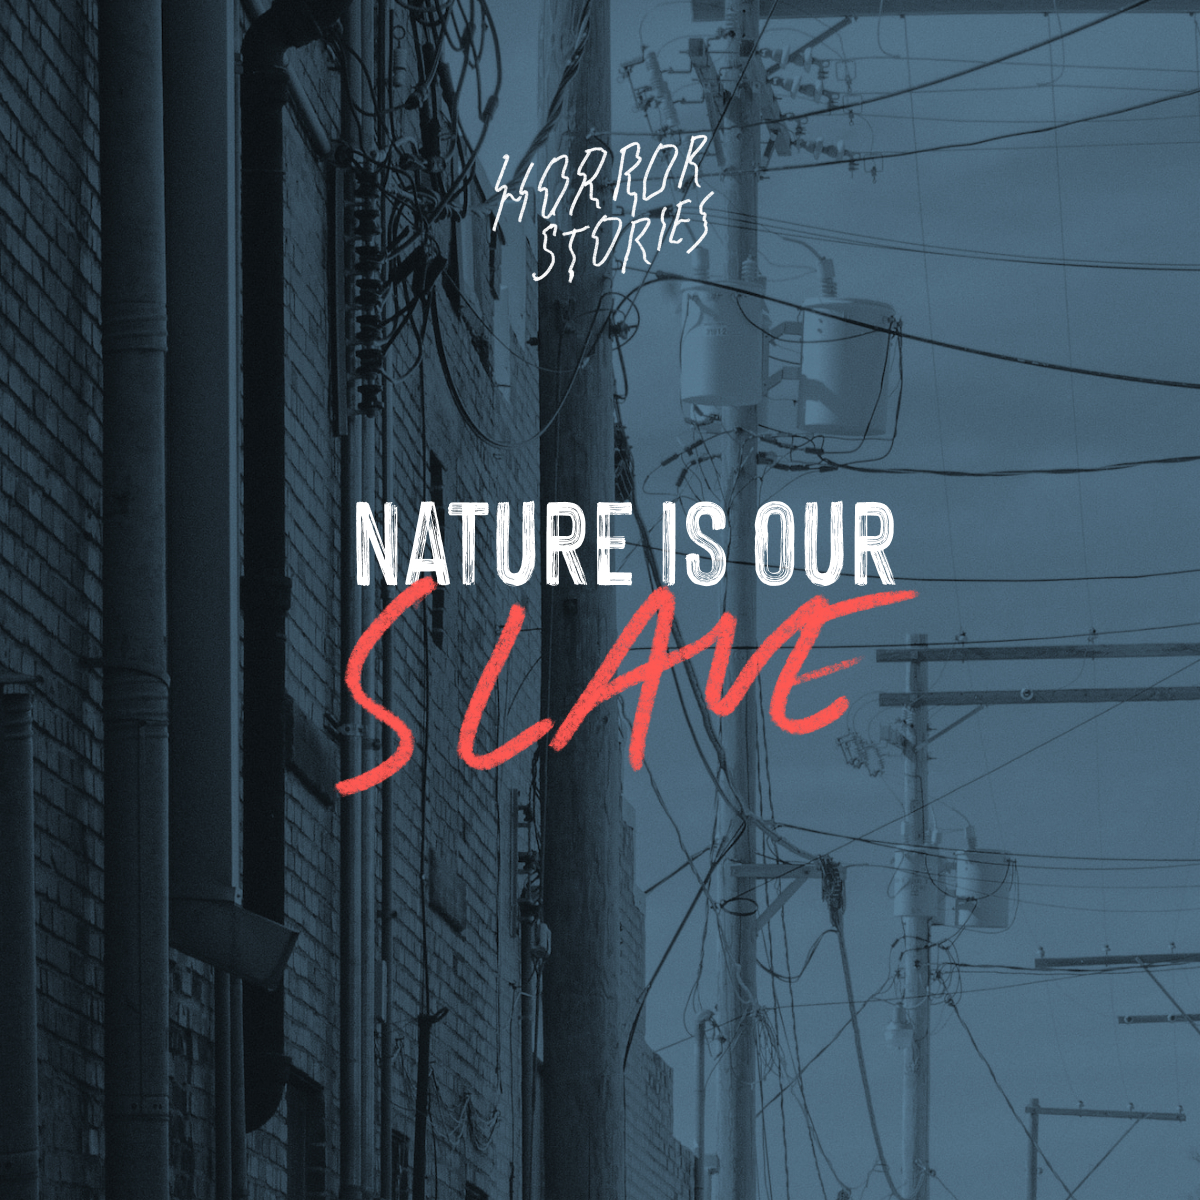 If you're wondering why the earth is on fire and flooding, it's because of one major #horrorstory we've been living by to design and shape our human systems, that story says nature is our slave, we can do what we like with nature as a resource for human progress.. #storiesforlife